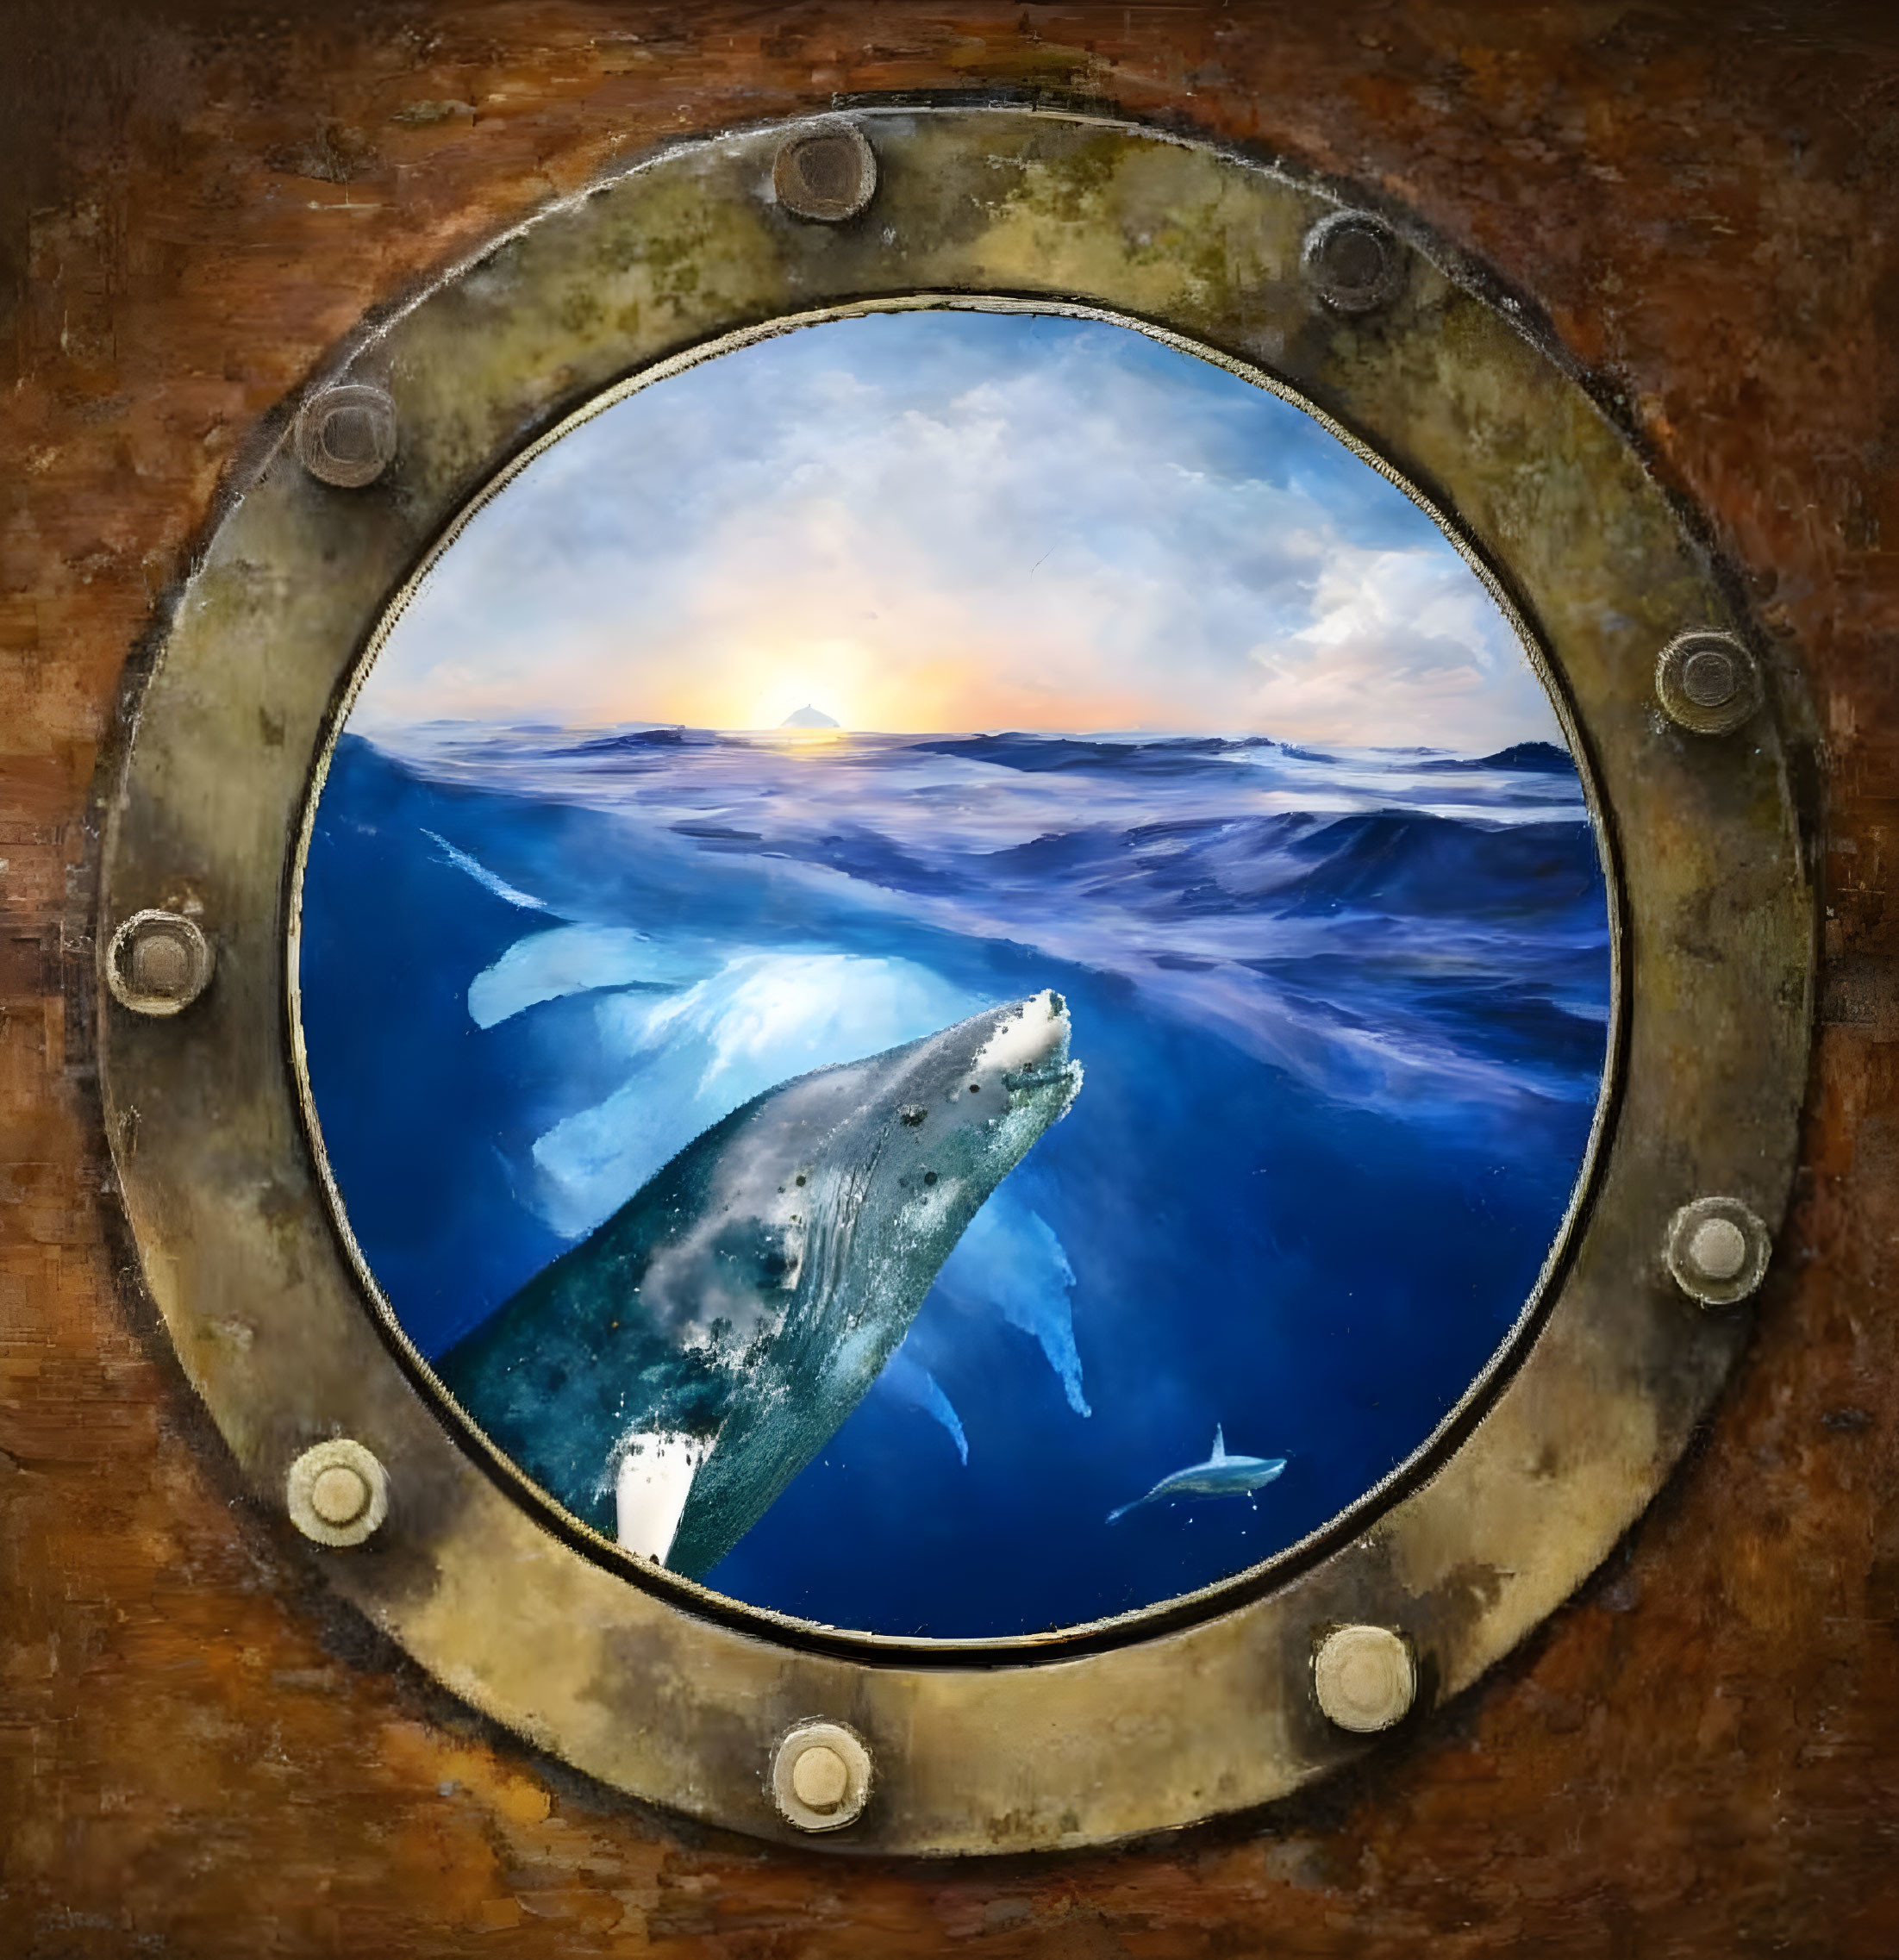 Whale in the porthole